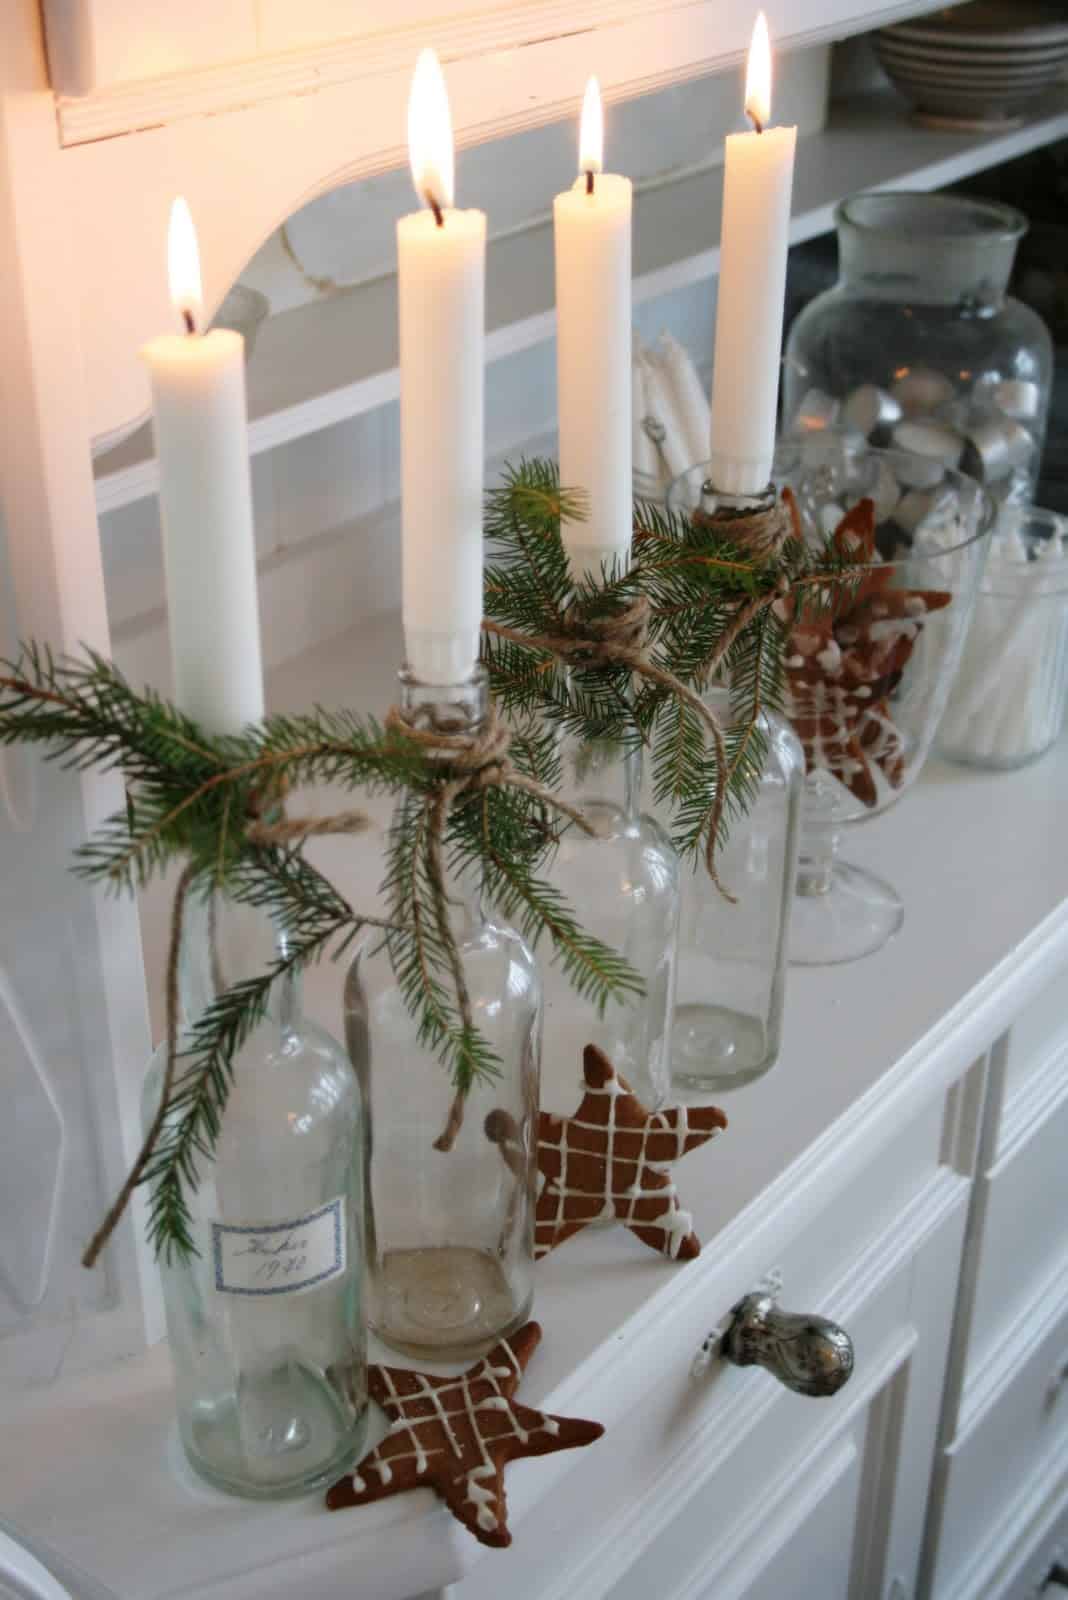 Candle centerpiece made from recycled wine bottles for cheap Christmas decoration.